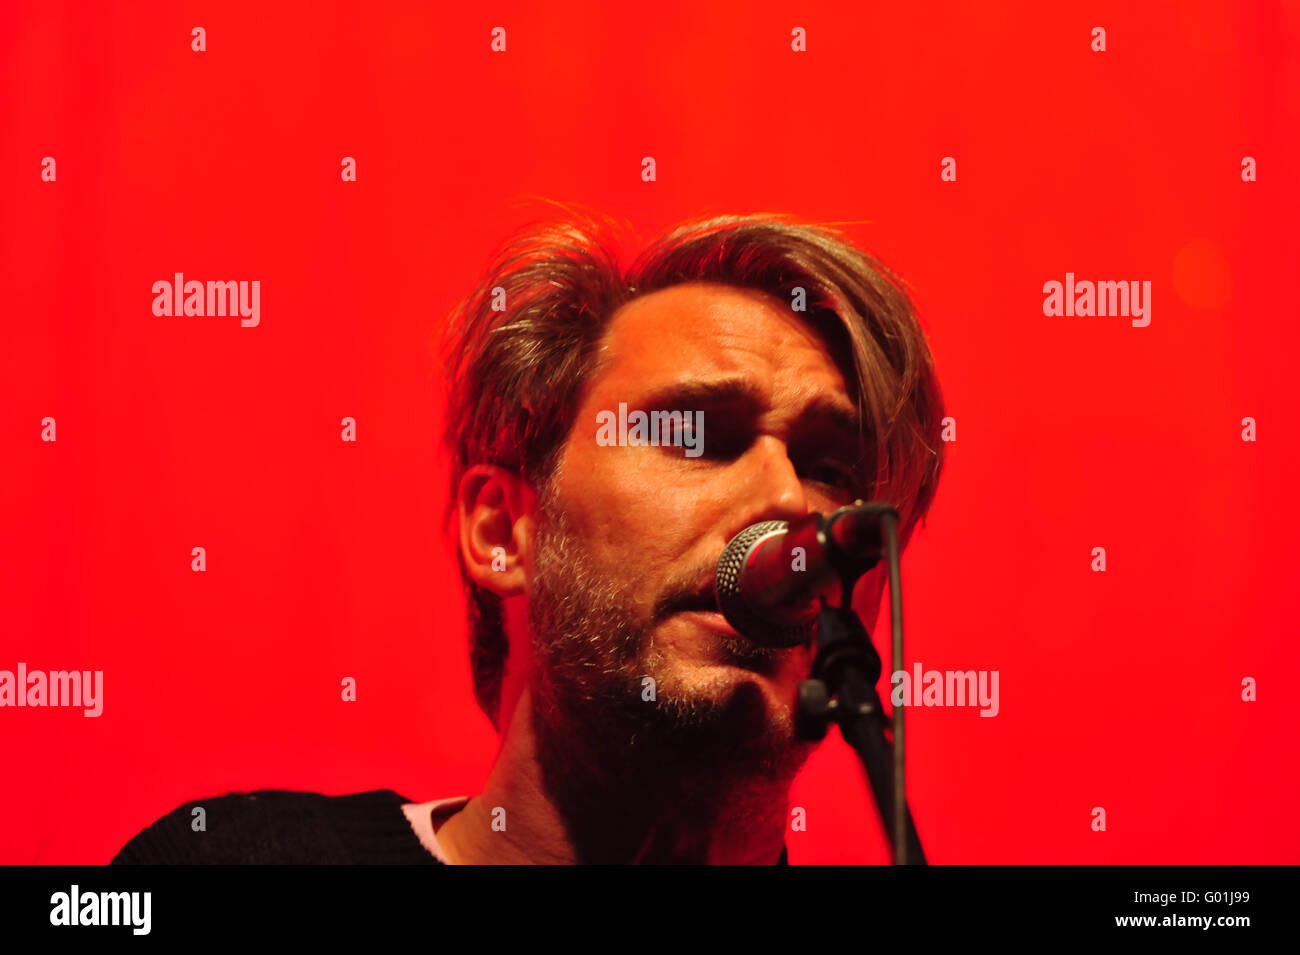 Tocotronic: EUROPA, DEUTSCHLAND, HAMBURG, 17.10.2015: Tocotronic live in der Hamburger Sporthalle. Editorial use only. Stock Photo